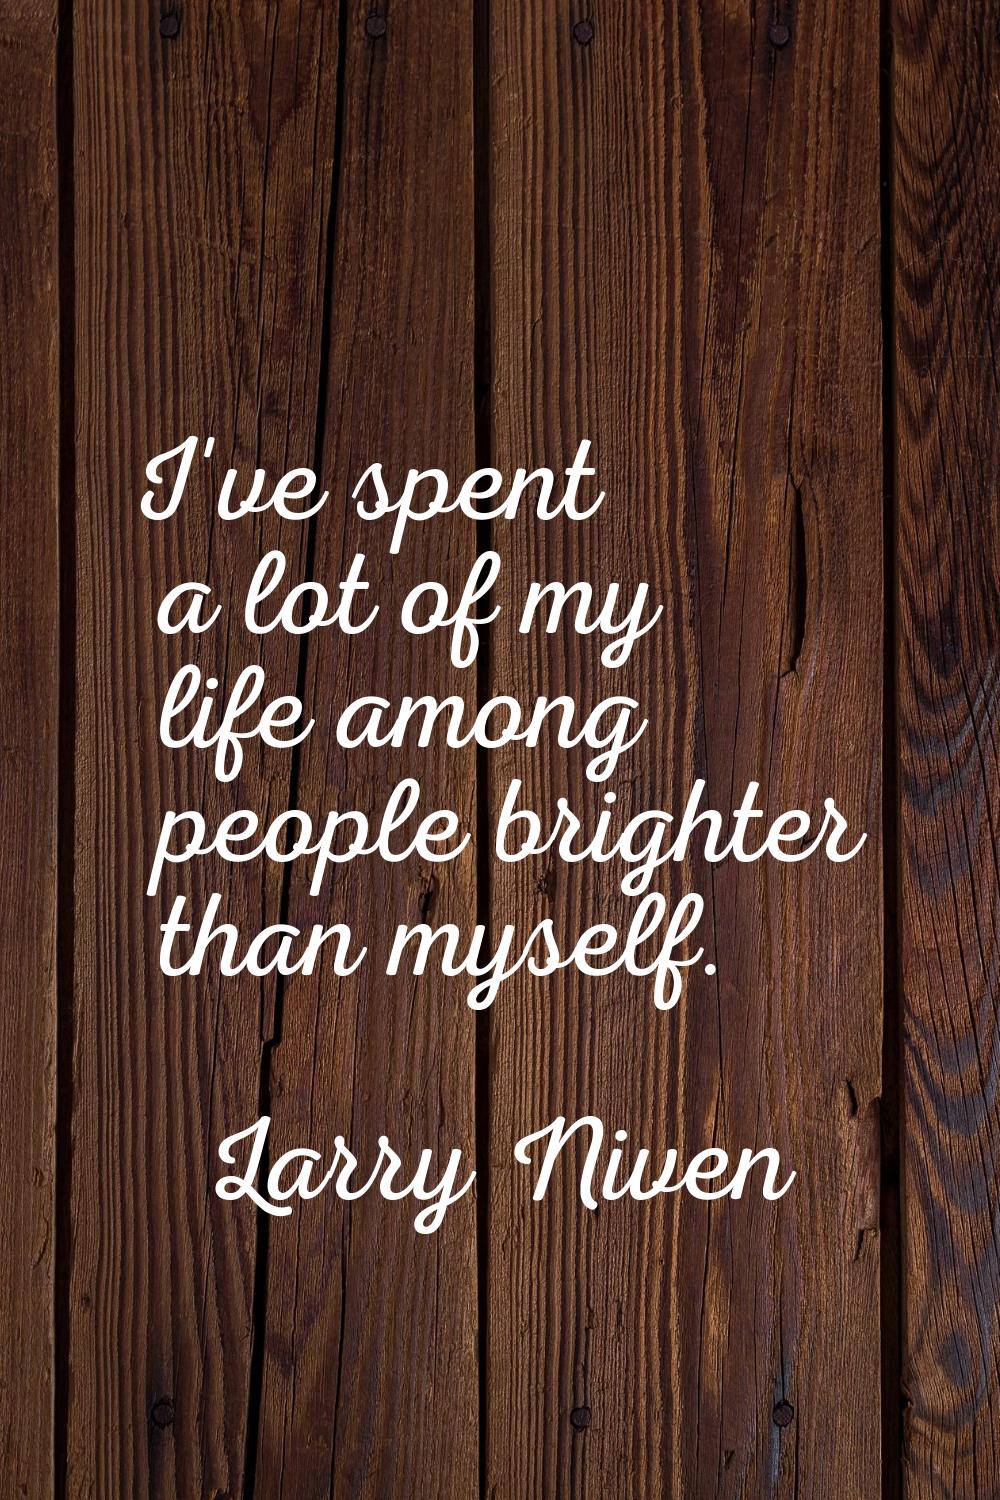 I've spent a lot of my life among people brighter than myself.